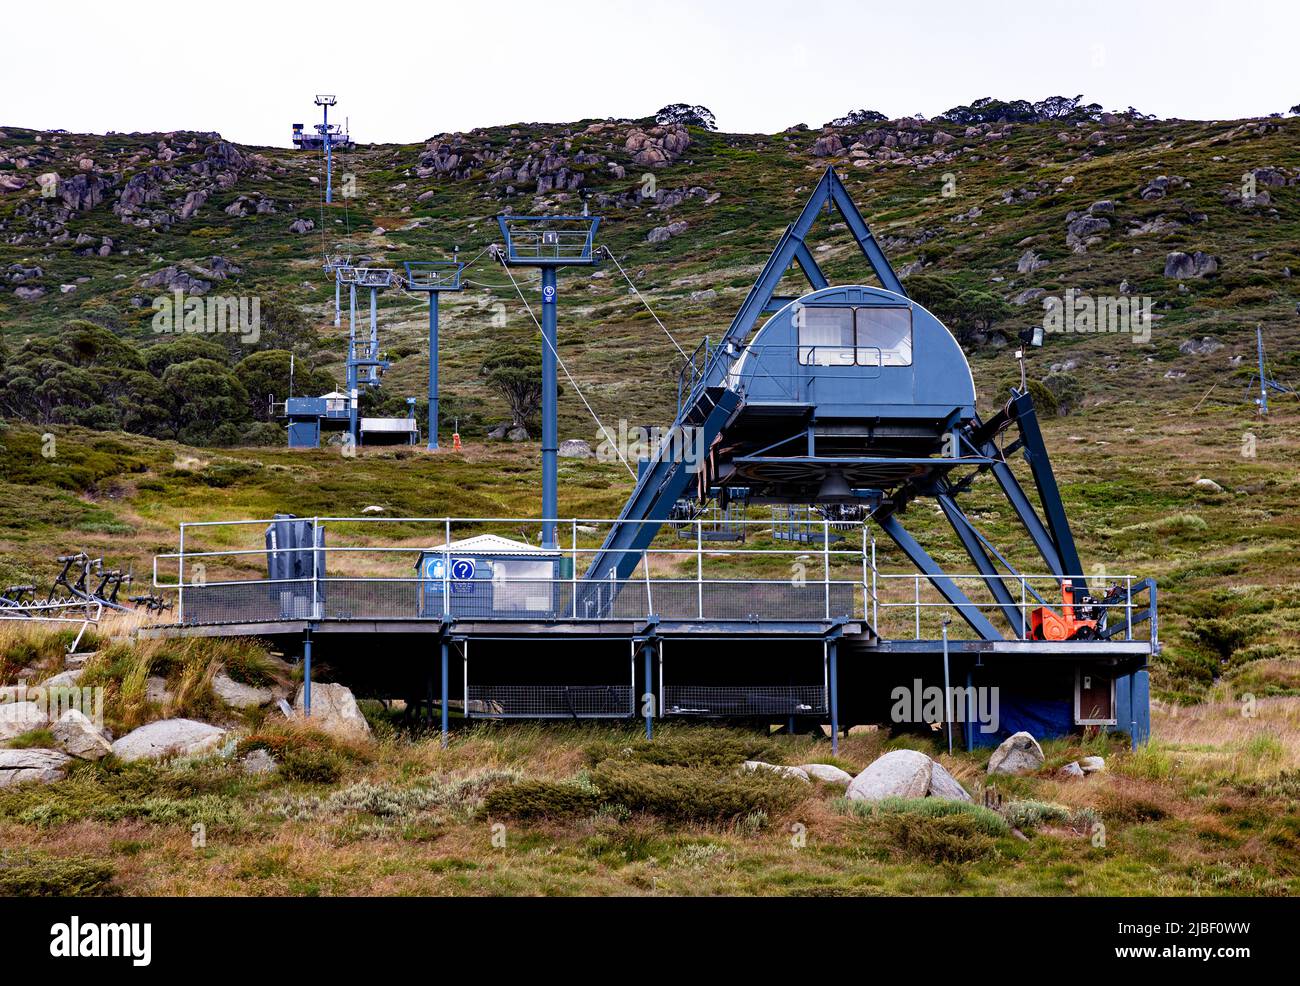 Ski lift ready for snow season at Charlotte Pass in Snowy Mountains region of New South Wales Stock Photo